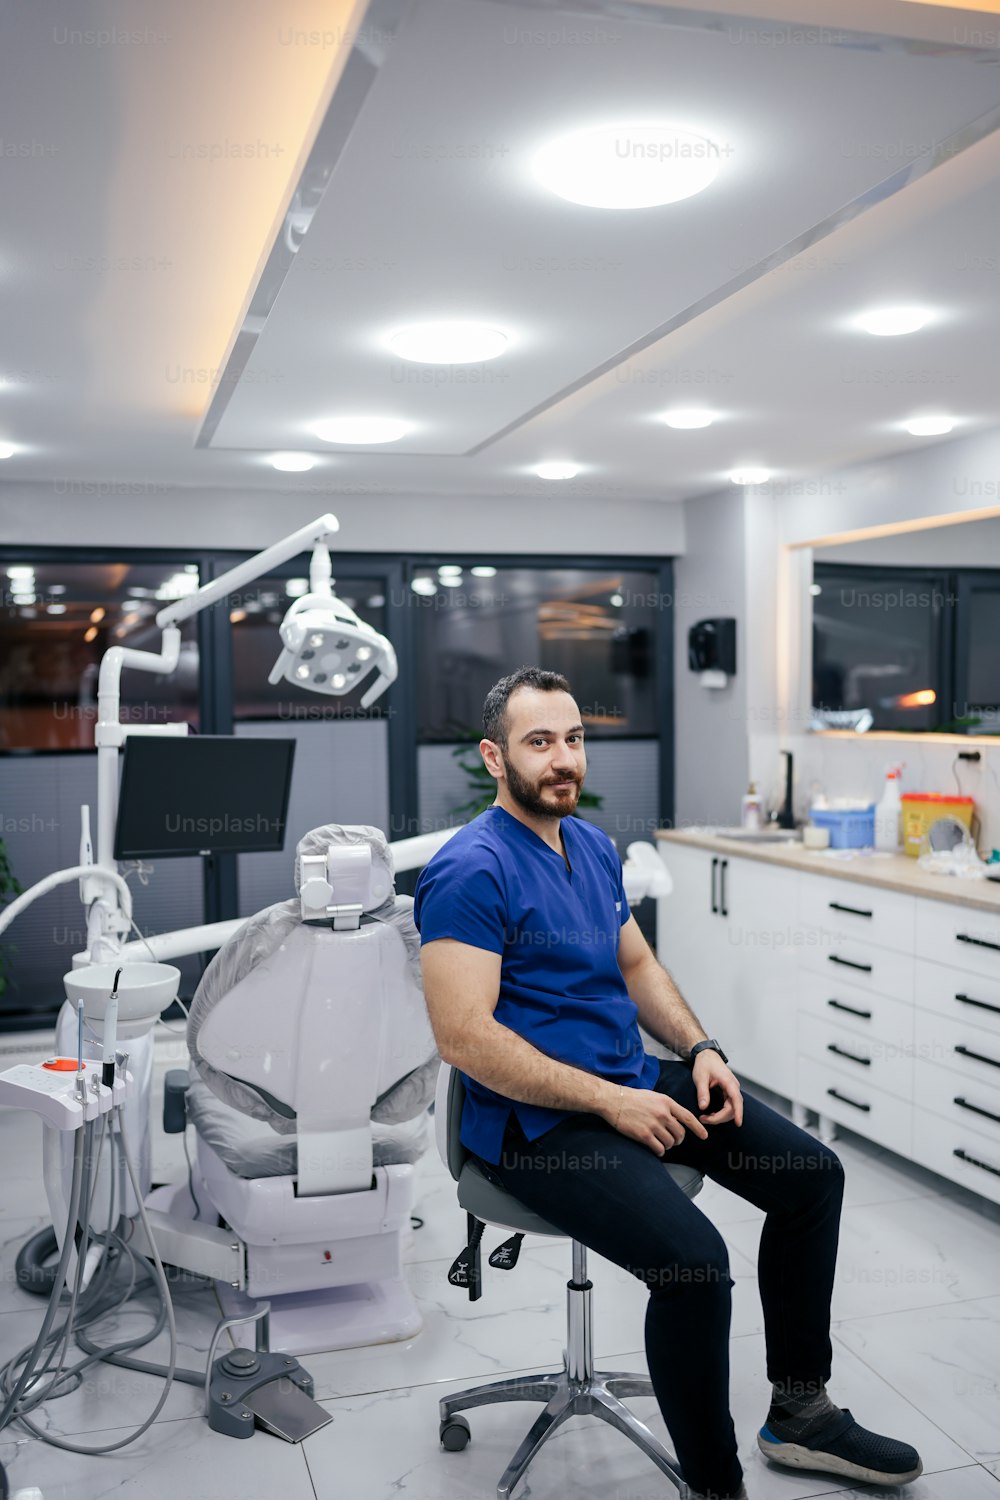 a man sitting on a chair in a dental room